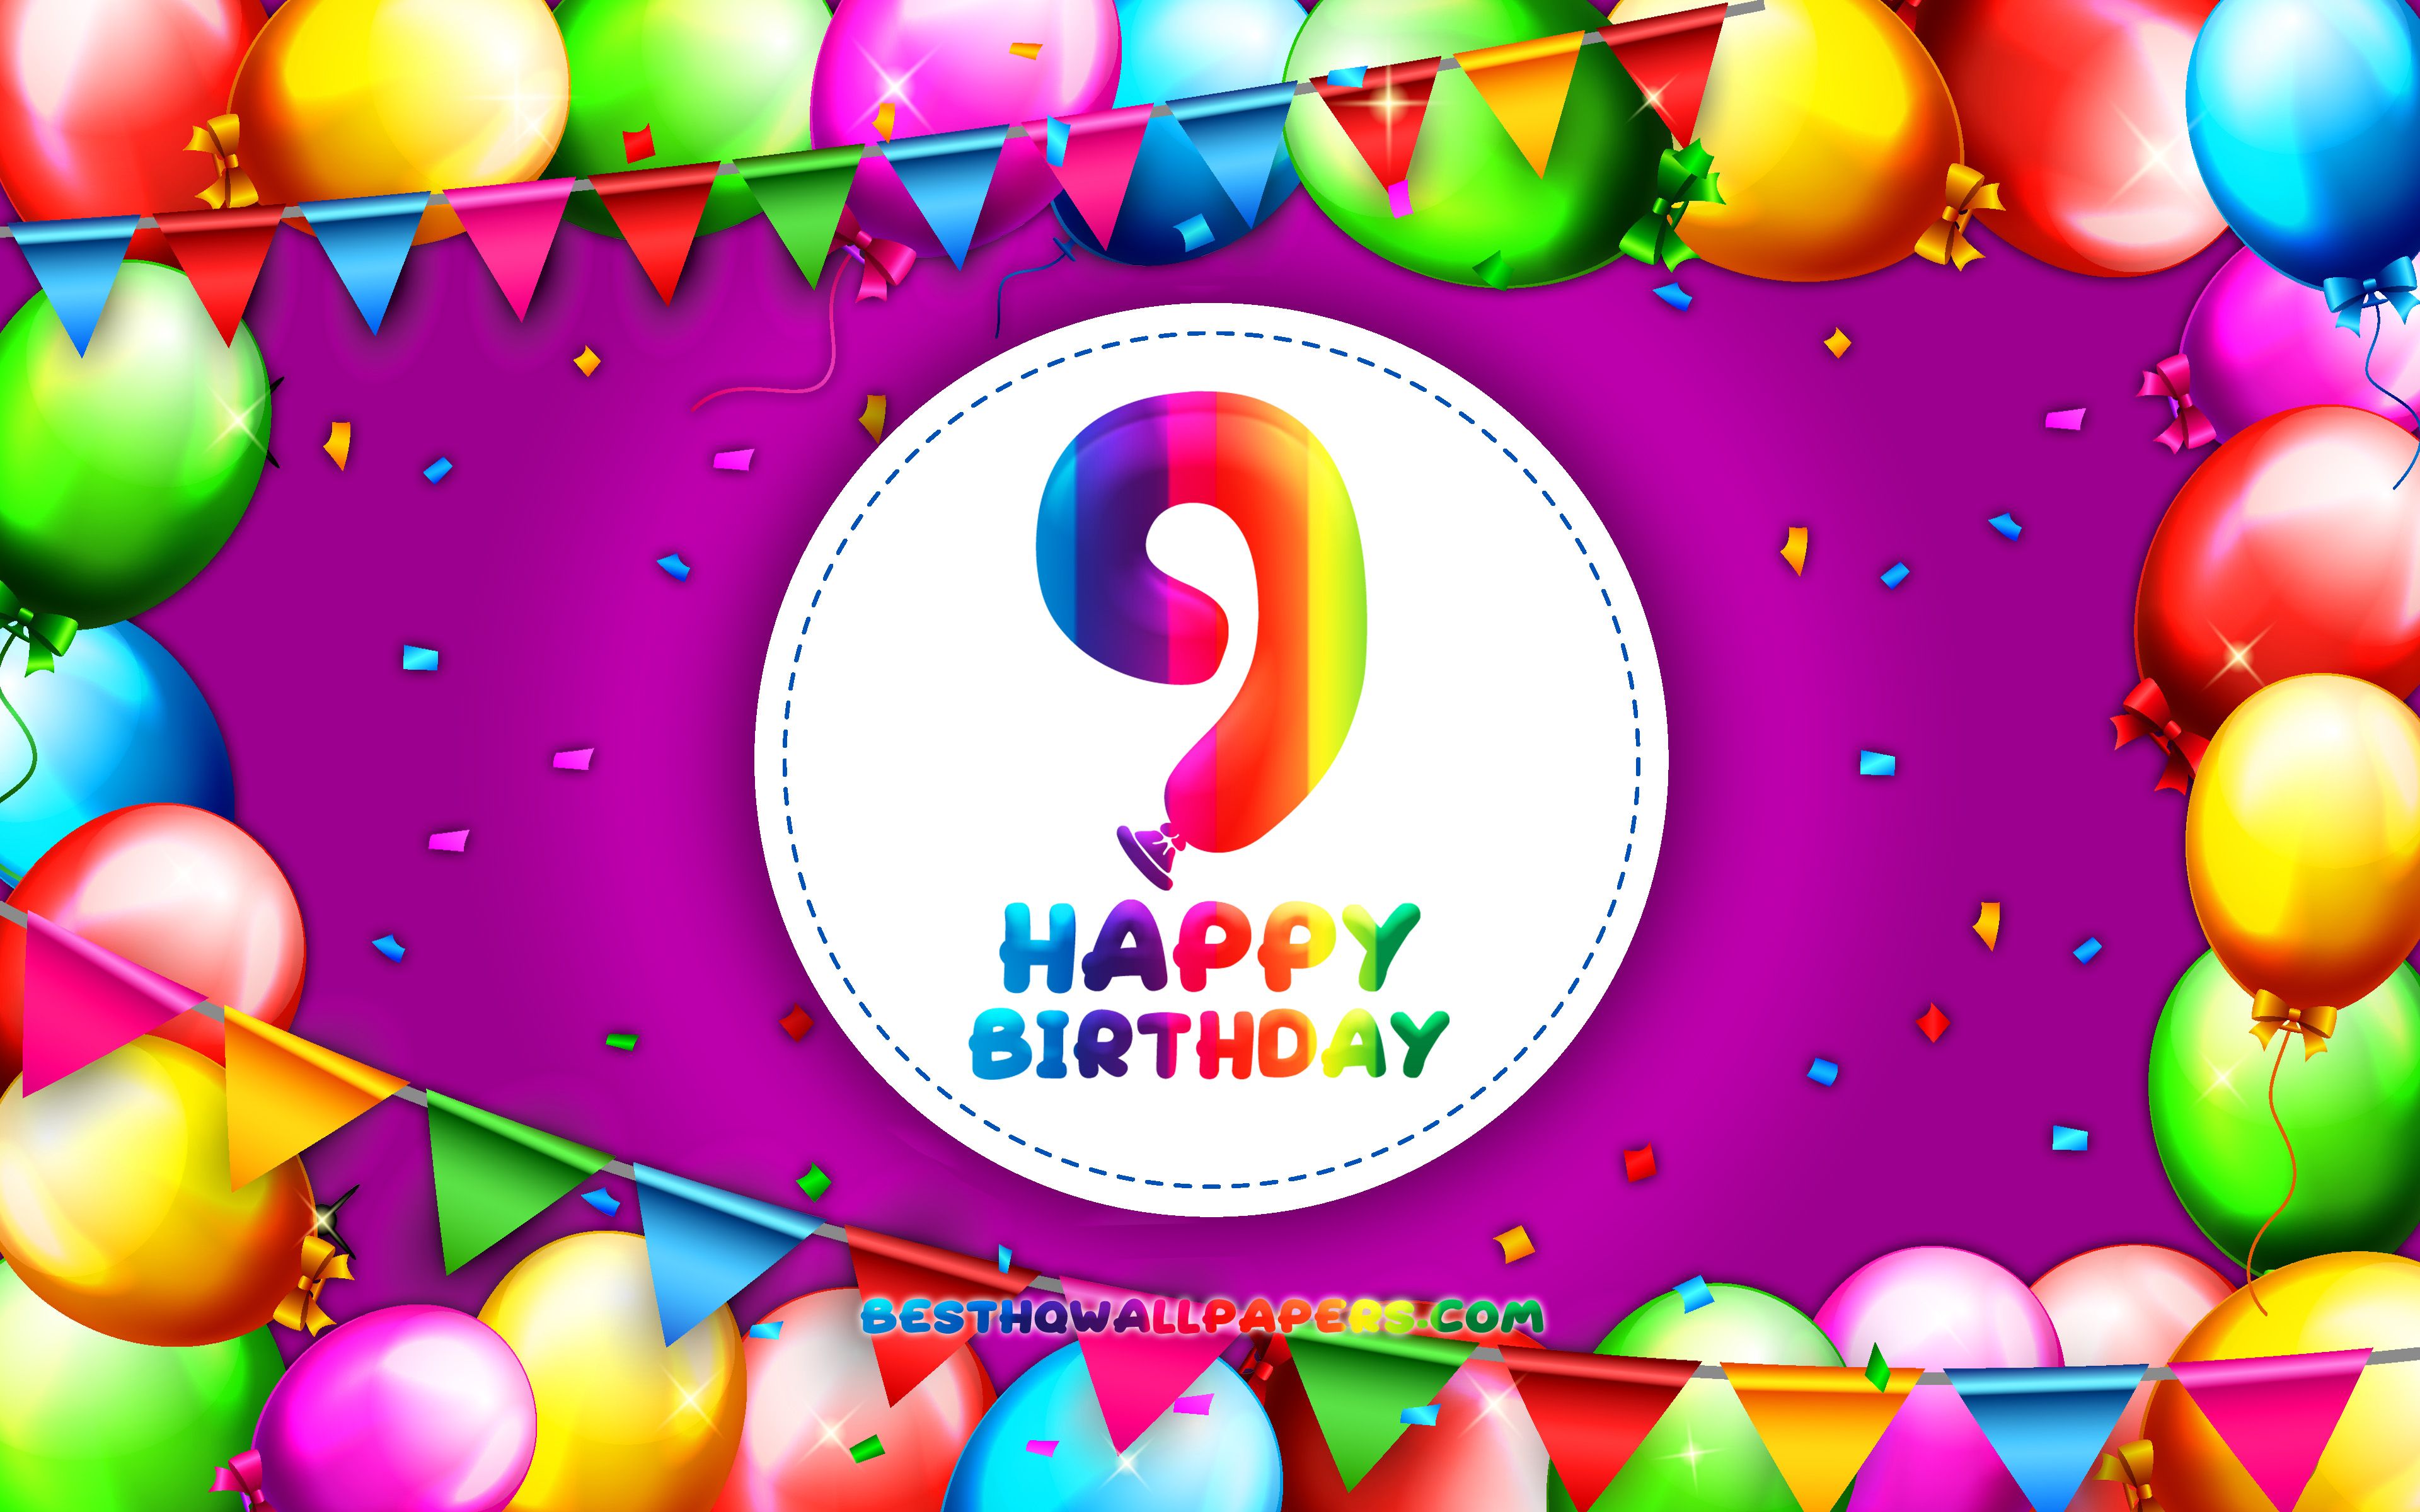 Download wallpaper Happy 9th birthday, 4k, colorful balloon frame, Birthday Party, purple background, Happy 9 Years Birthday, creative, 9th Birthday, Birthday concept, 9th Birthday Party for desktop with resolution 3840x2400. High Quality